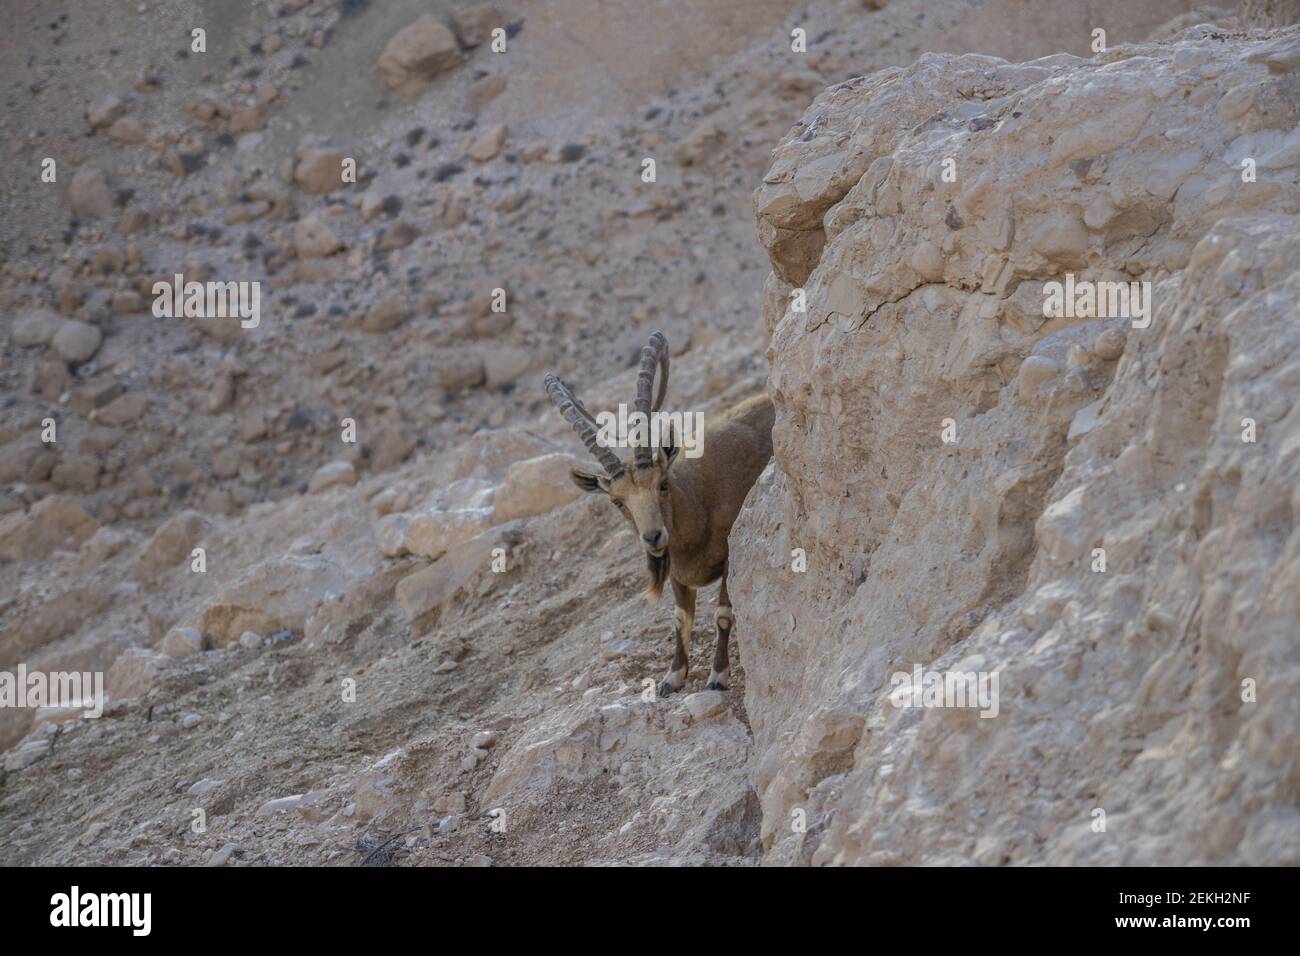 The Nubian ibex (Capra nubiana) is a desert-dwelling goat species found in mountainous areas of northern and northeast Africa, and the Middle East. Stock Photo